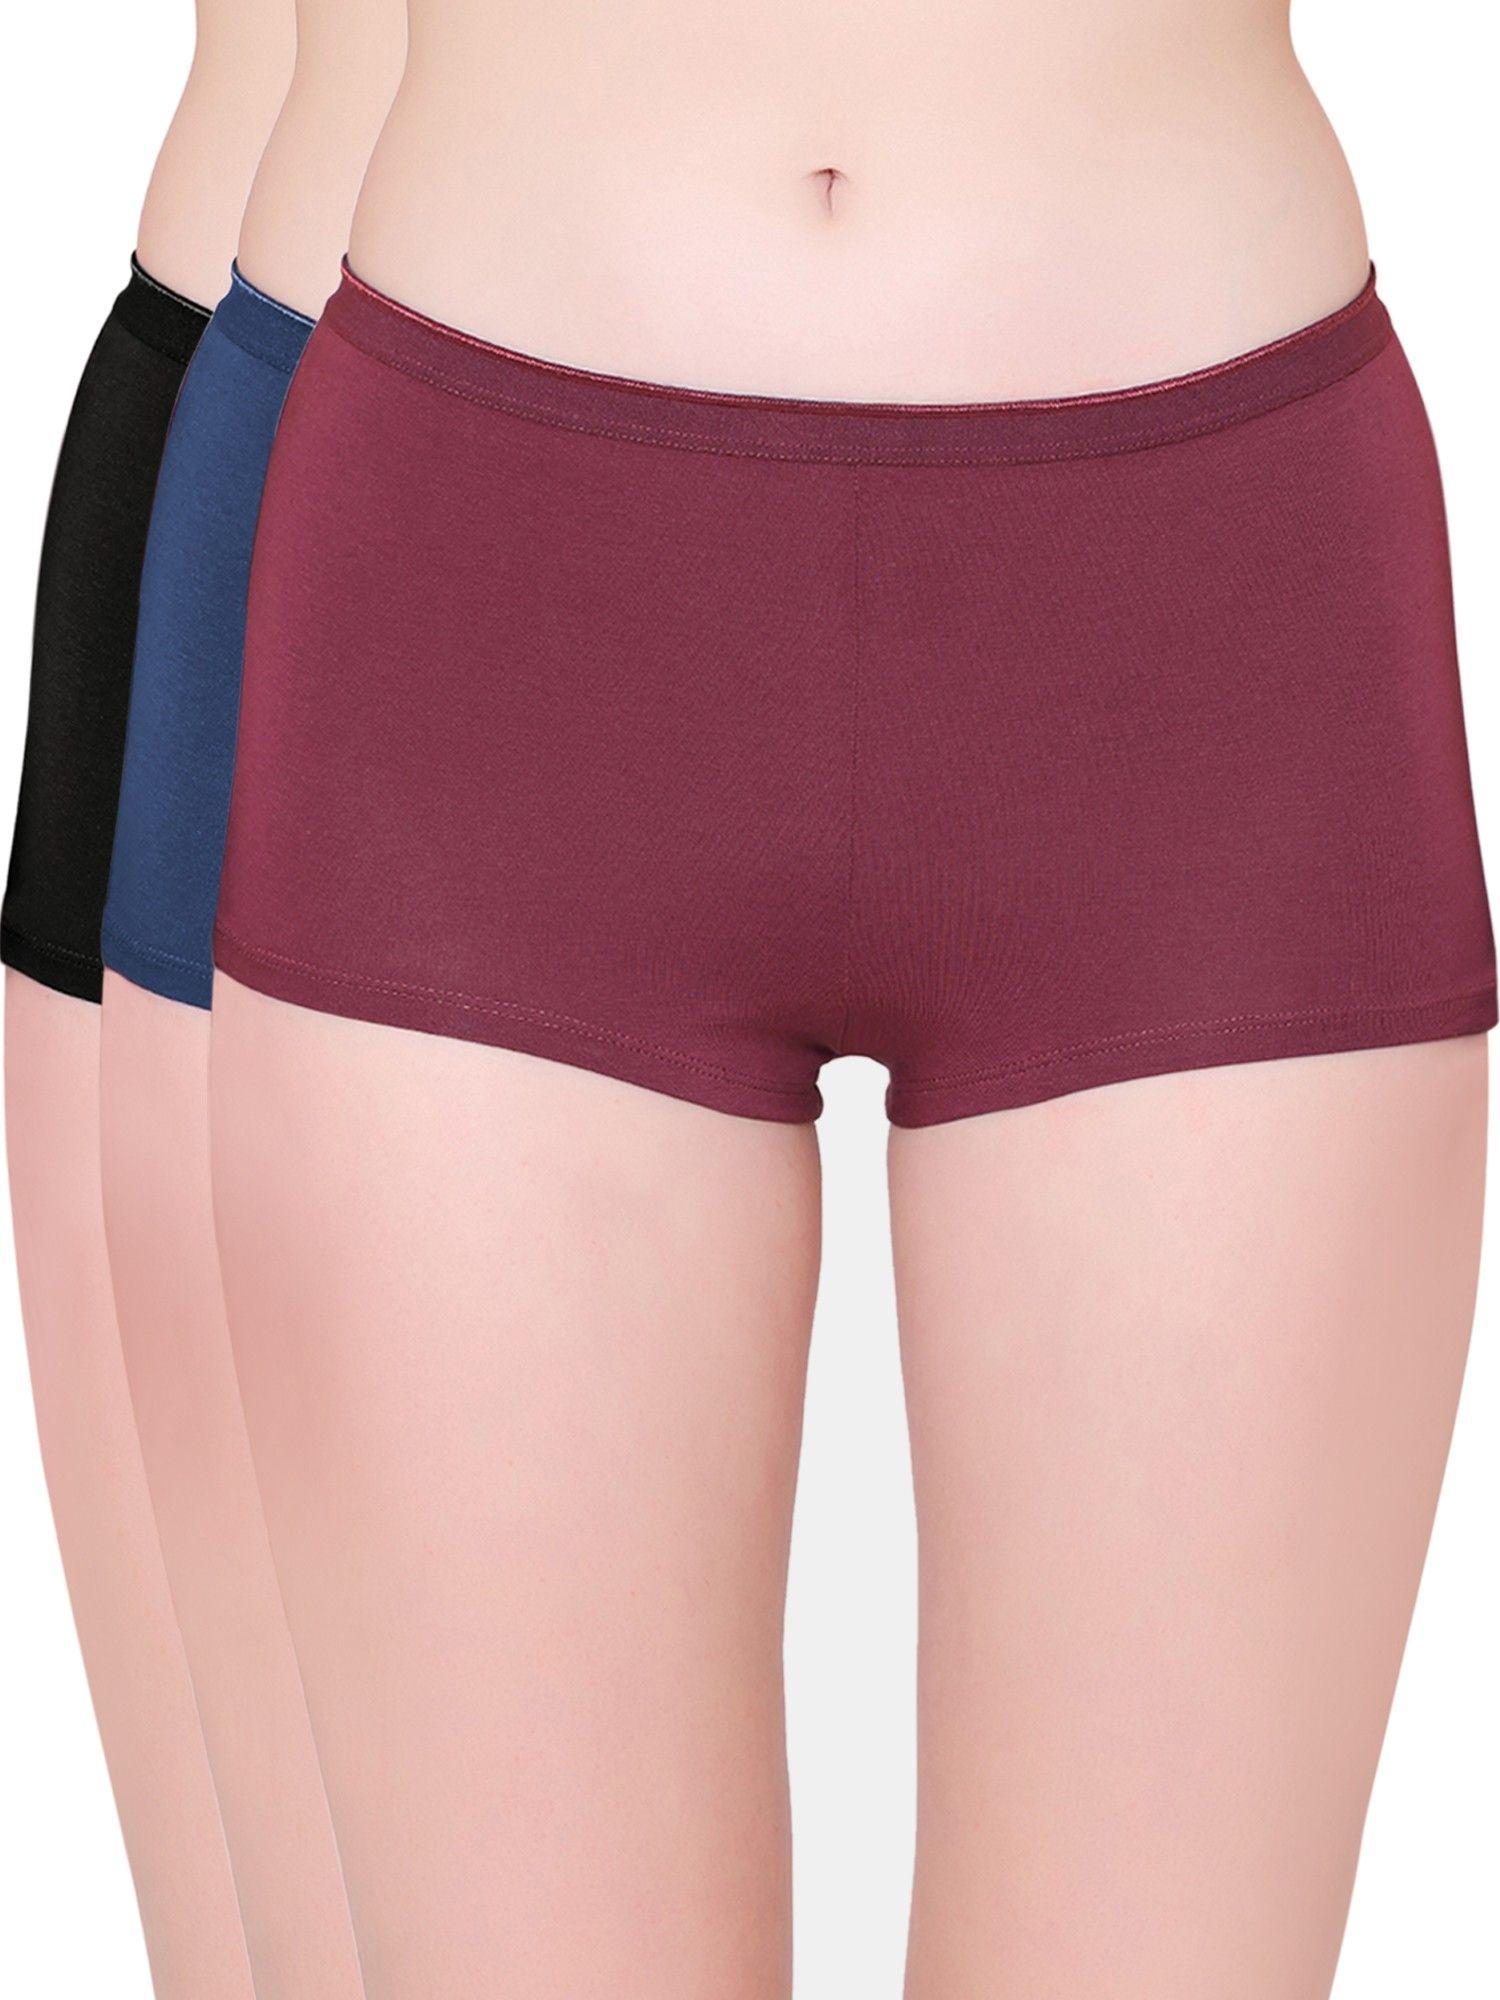 womens cotton spandex multicolor solid shorty briefs- (pack of 3)